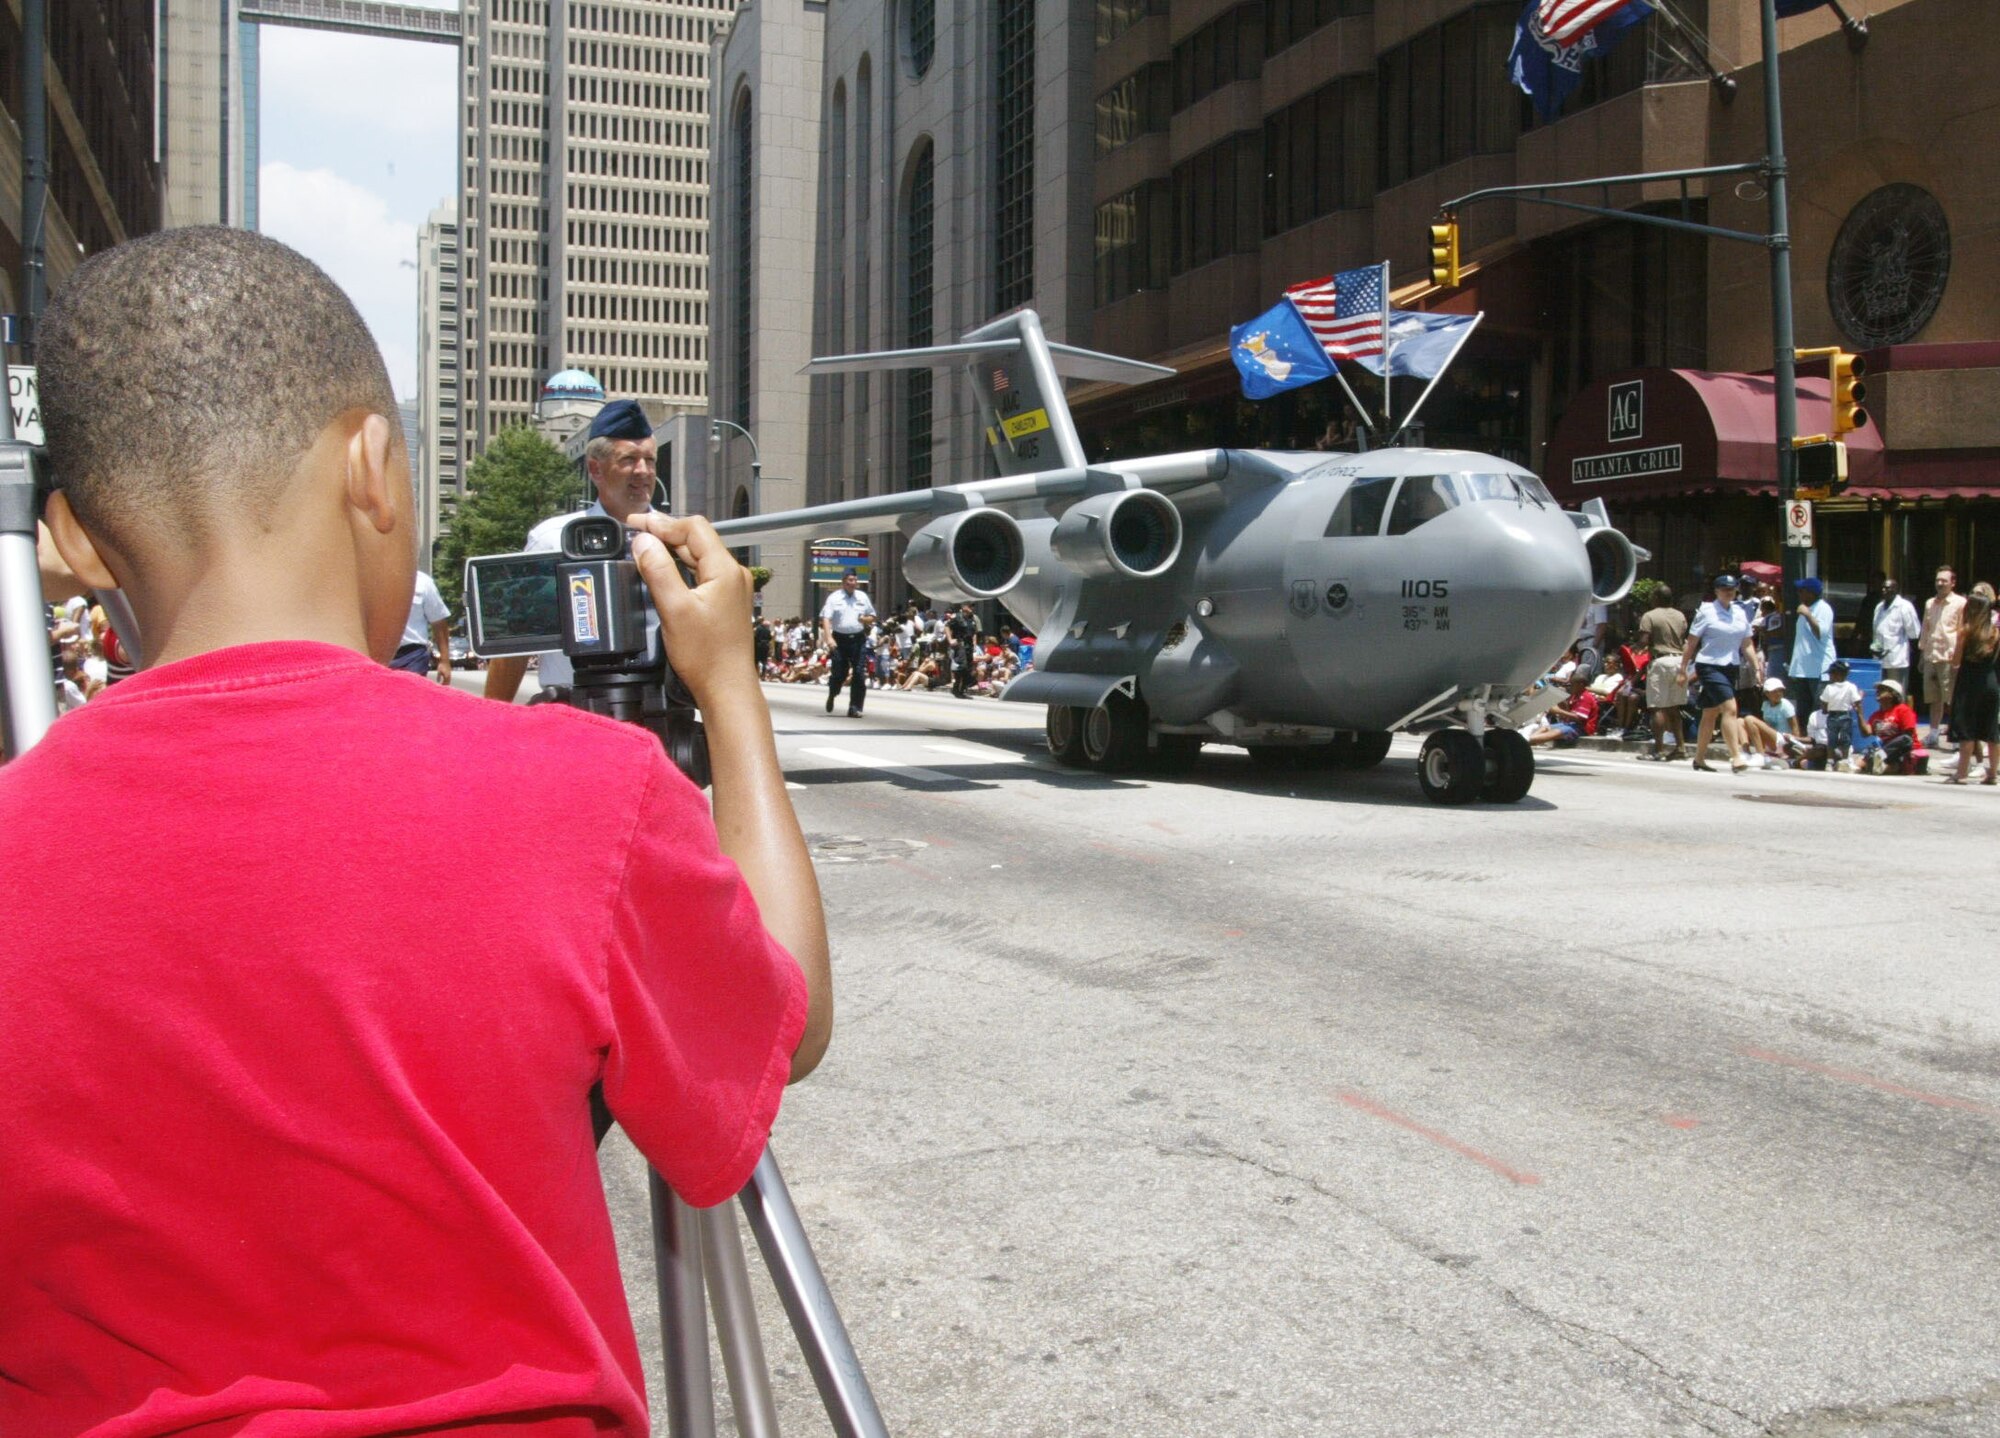 Nacoleon Hillsman, a young cameraman, records the Mini C-17 Globemaster as it makes its way down the parade route while participating in the "Salute 2 America" parade held in downtown Atlanta during 4th of July celebrations. The Mini C-17 Globemaster and its crew are from Charleston Air Force Base, South Carolina.(U.S. Air Force Photo/Don Peek)